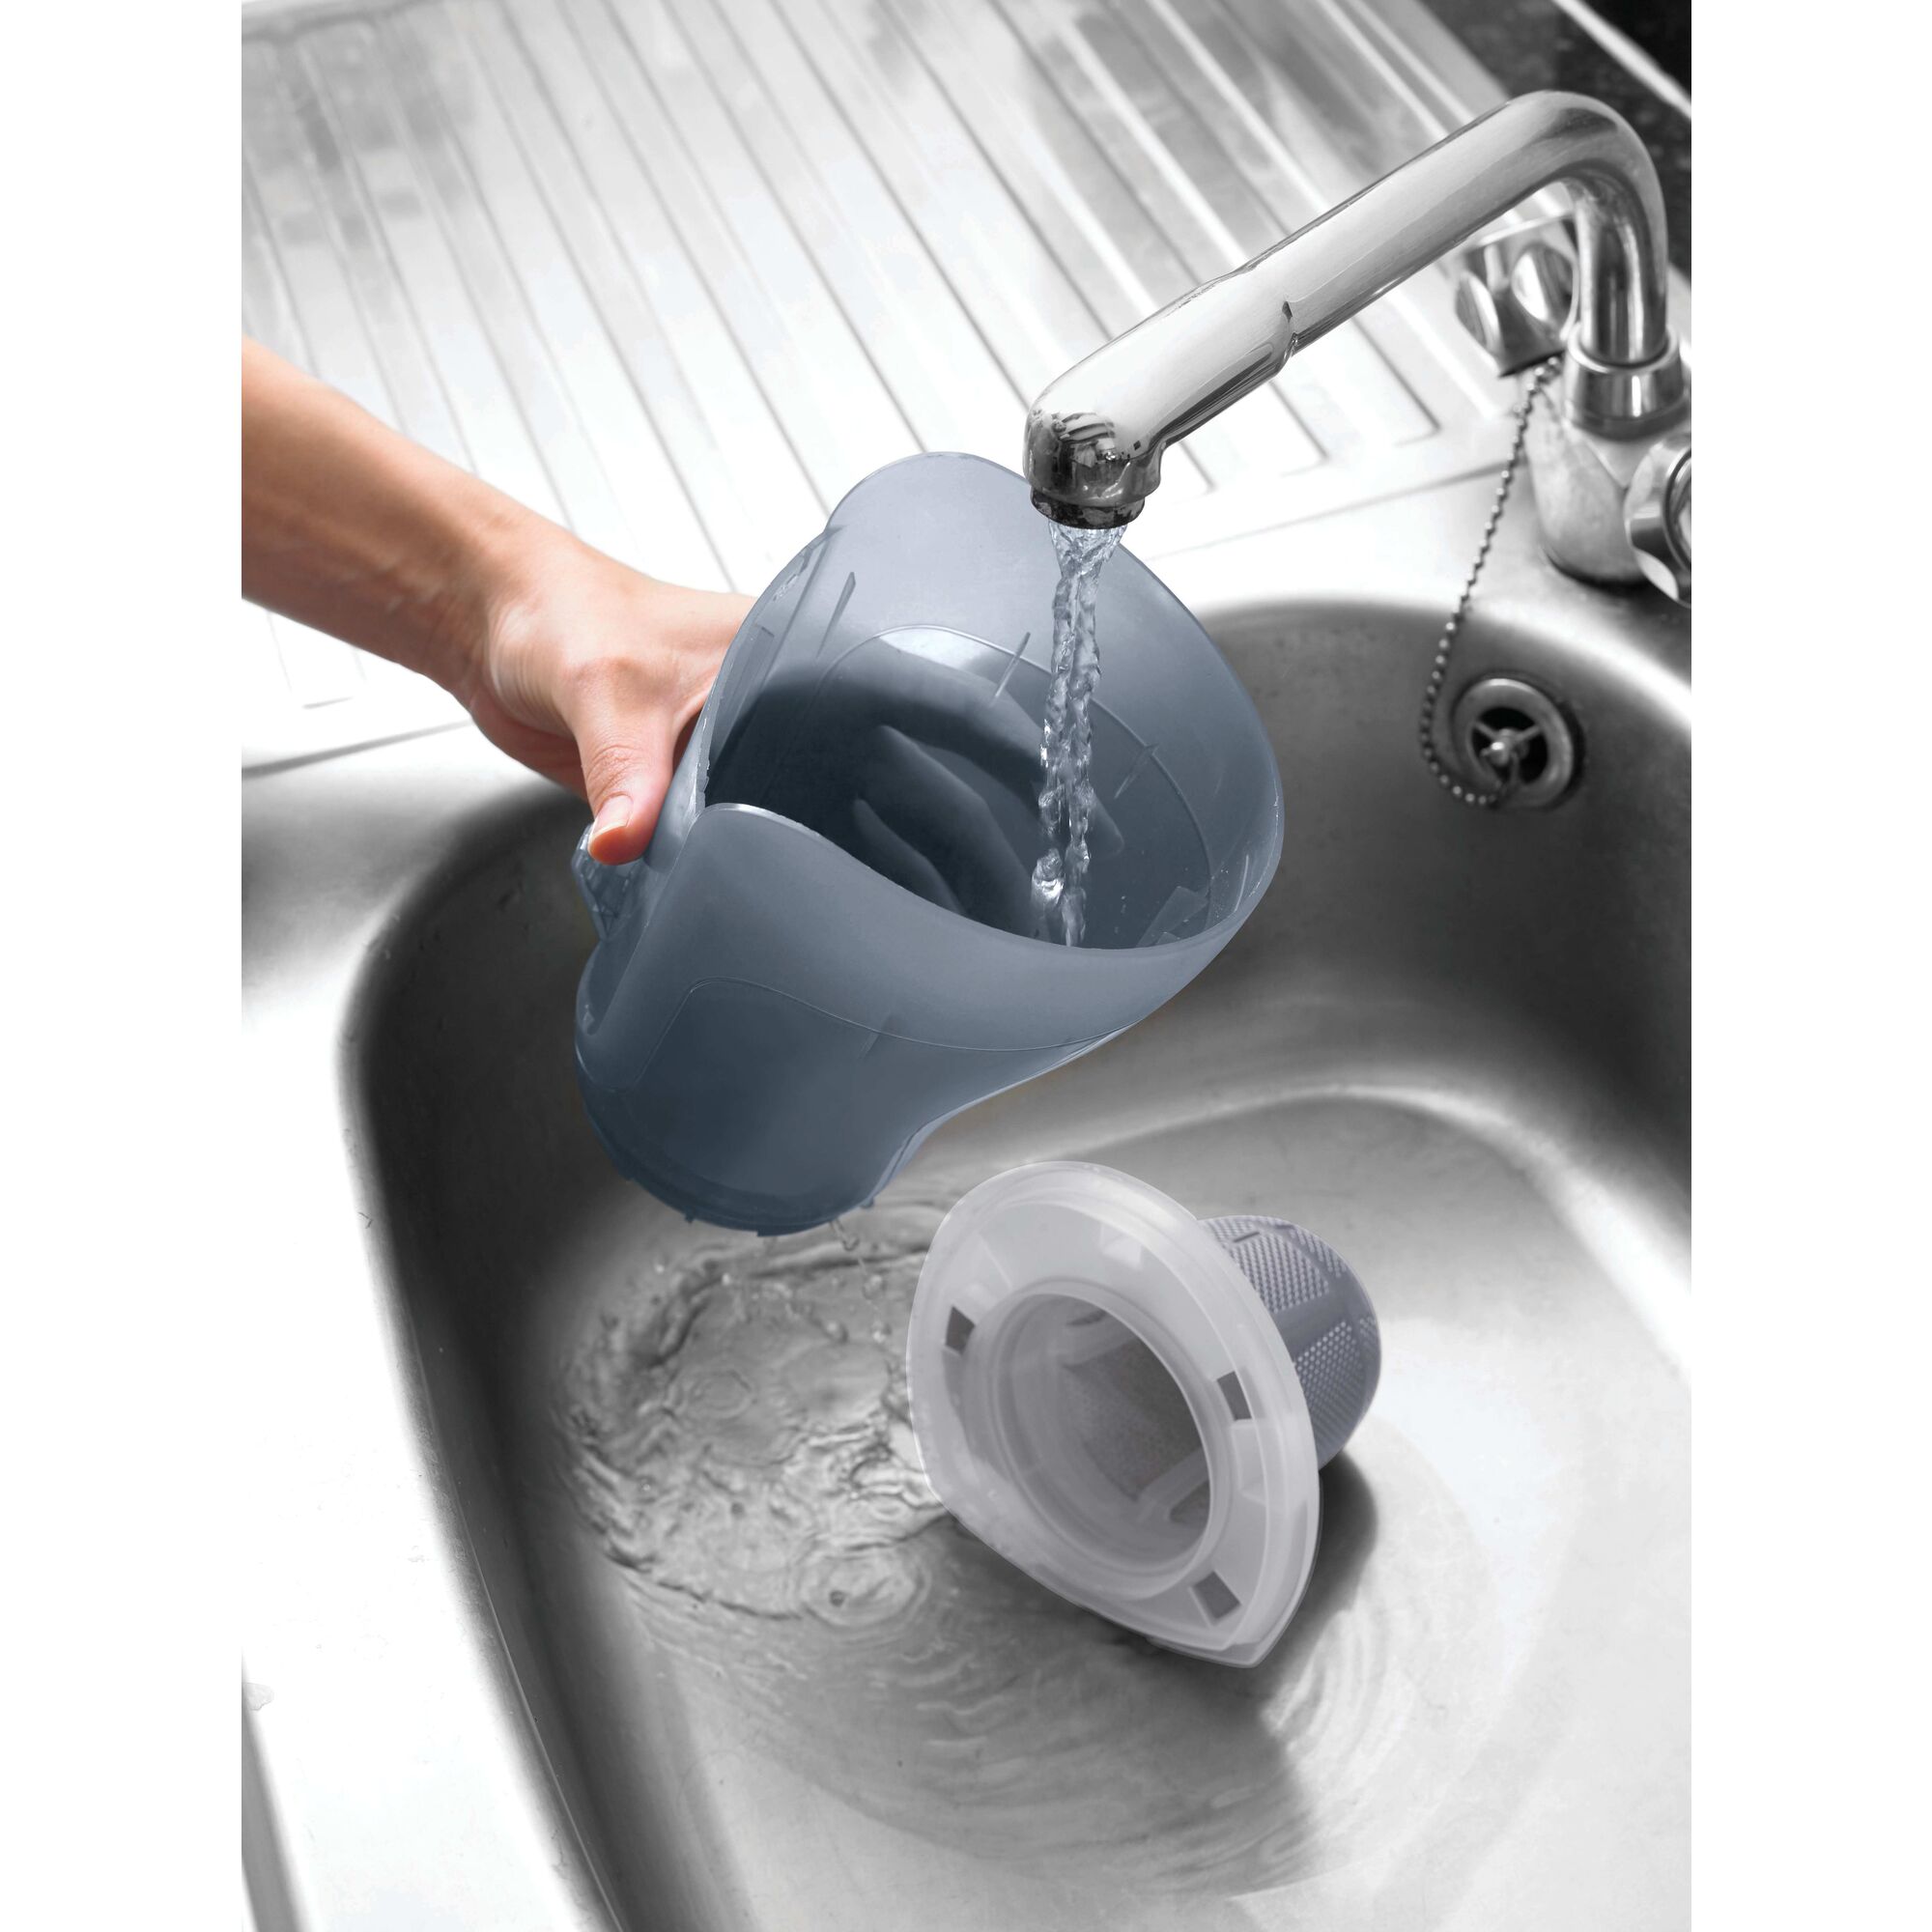 Washable bowl feature in dustbuster cordless hand vacuum.